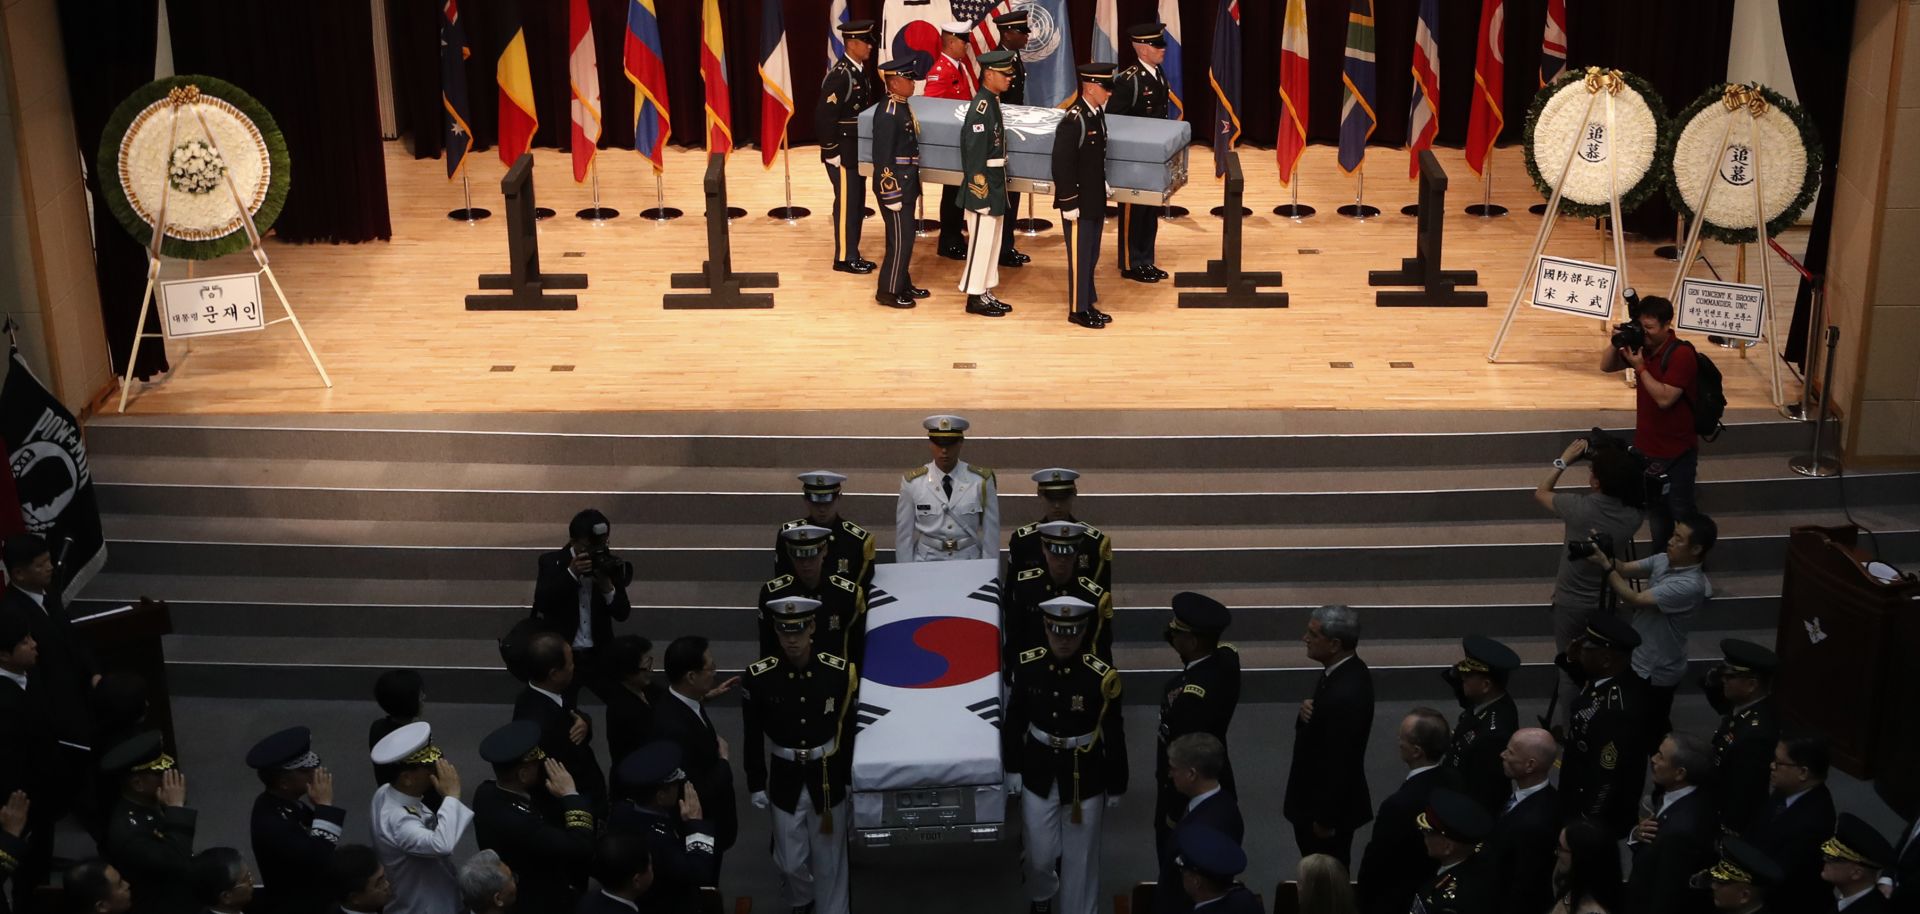 The United States, United Nations and South Korea hold a repatriation ceremony on July 13, 2018, in Seoul to return home the remains of an unidentified soldier, presumably American, and a South Korean soldier killed during the 1950-53 Korean War.